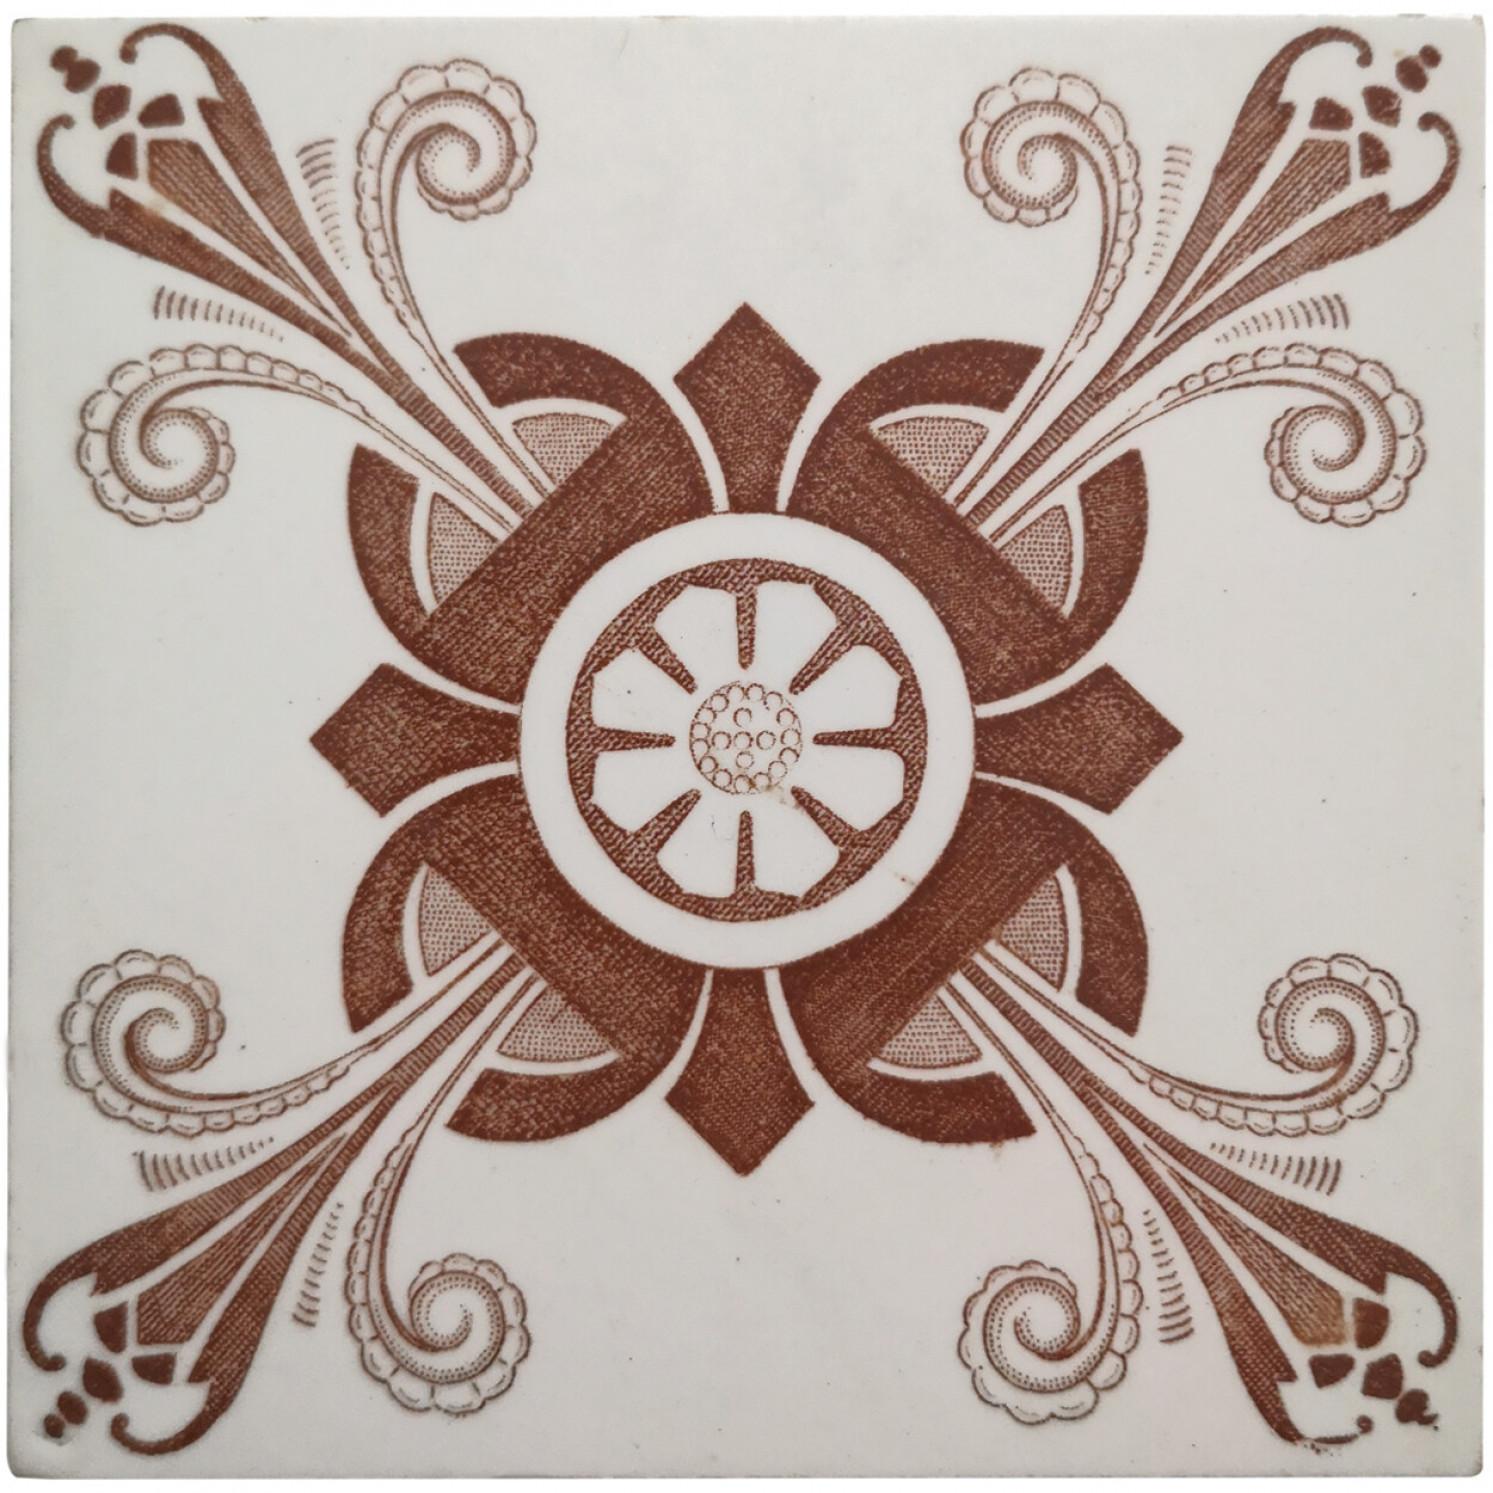 1 of the 30 pcs. Exceptional antique wall tiles with nice Art Deco Pattern, Le Claive, circa 1920, Belgium.
The dimensions per tile are 4.7 inch (12 cm) × 4.7 inch (12 cm).

Please note that the piece is for one piece!

Condition is generally very